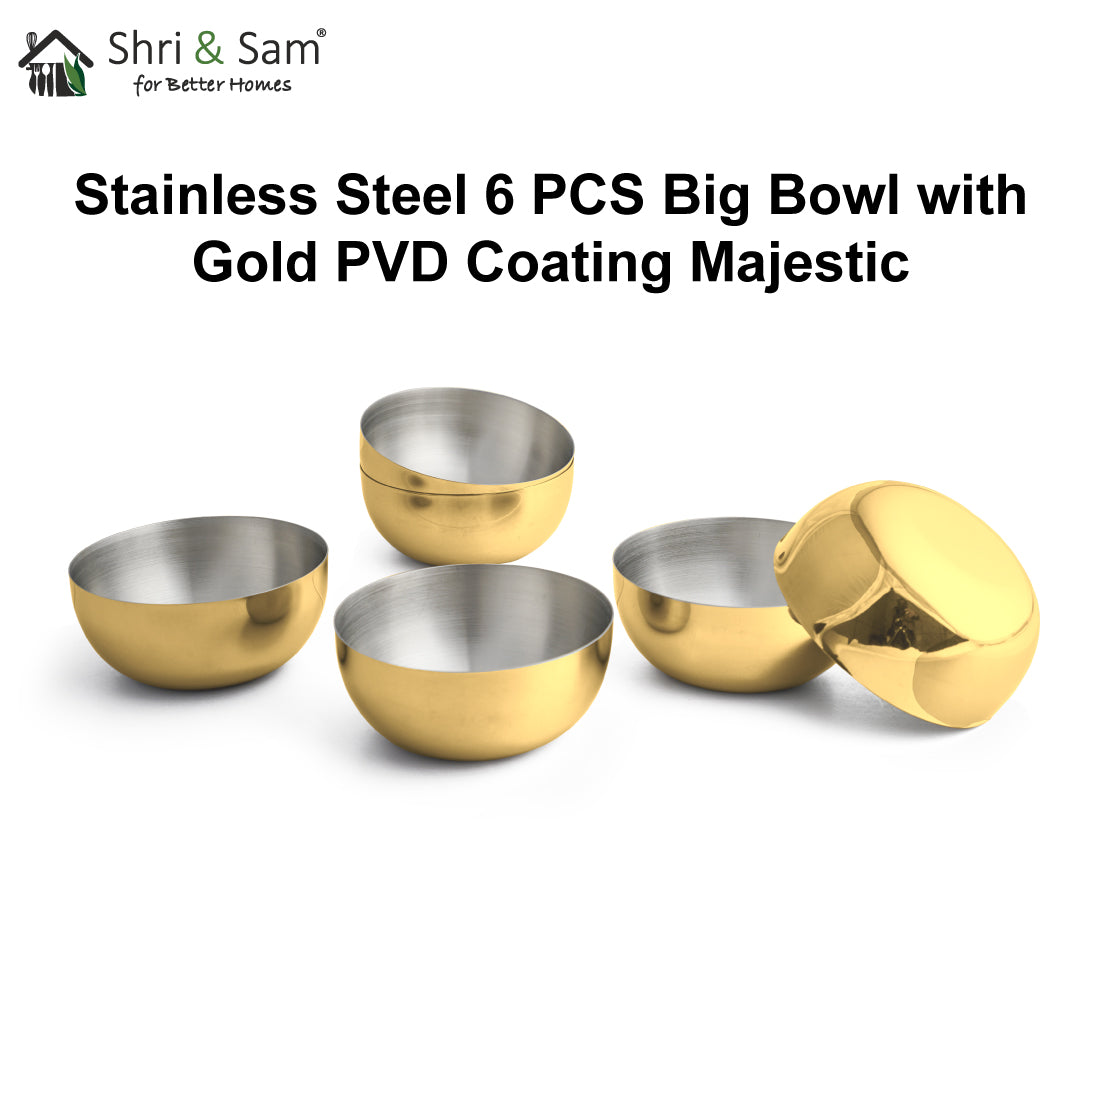 Stainless Steel 6 PCS Big Bowl with Gold PVD Coating Majestic